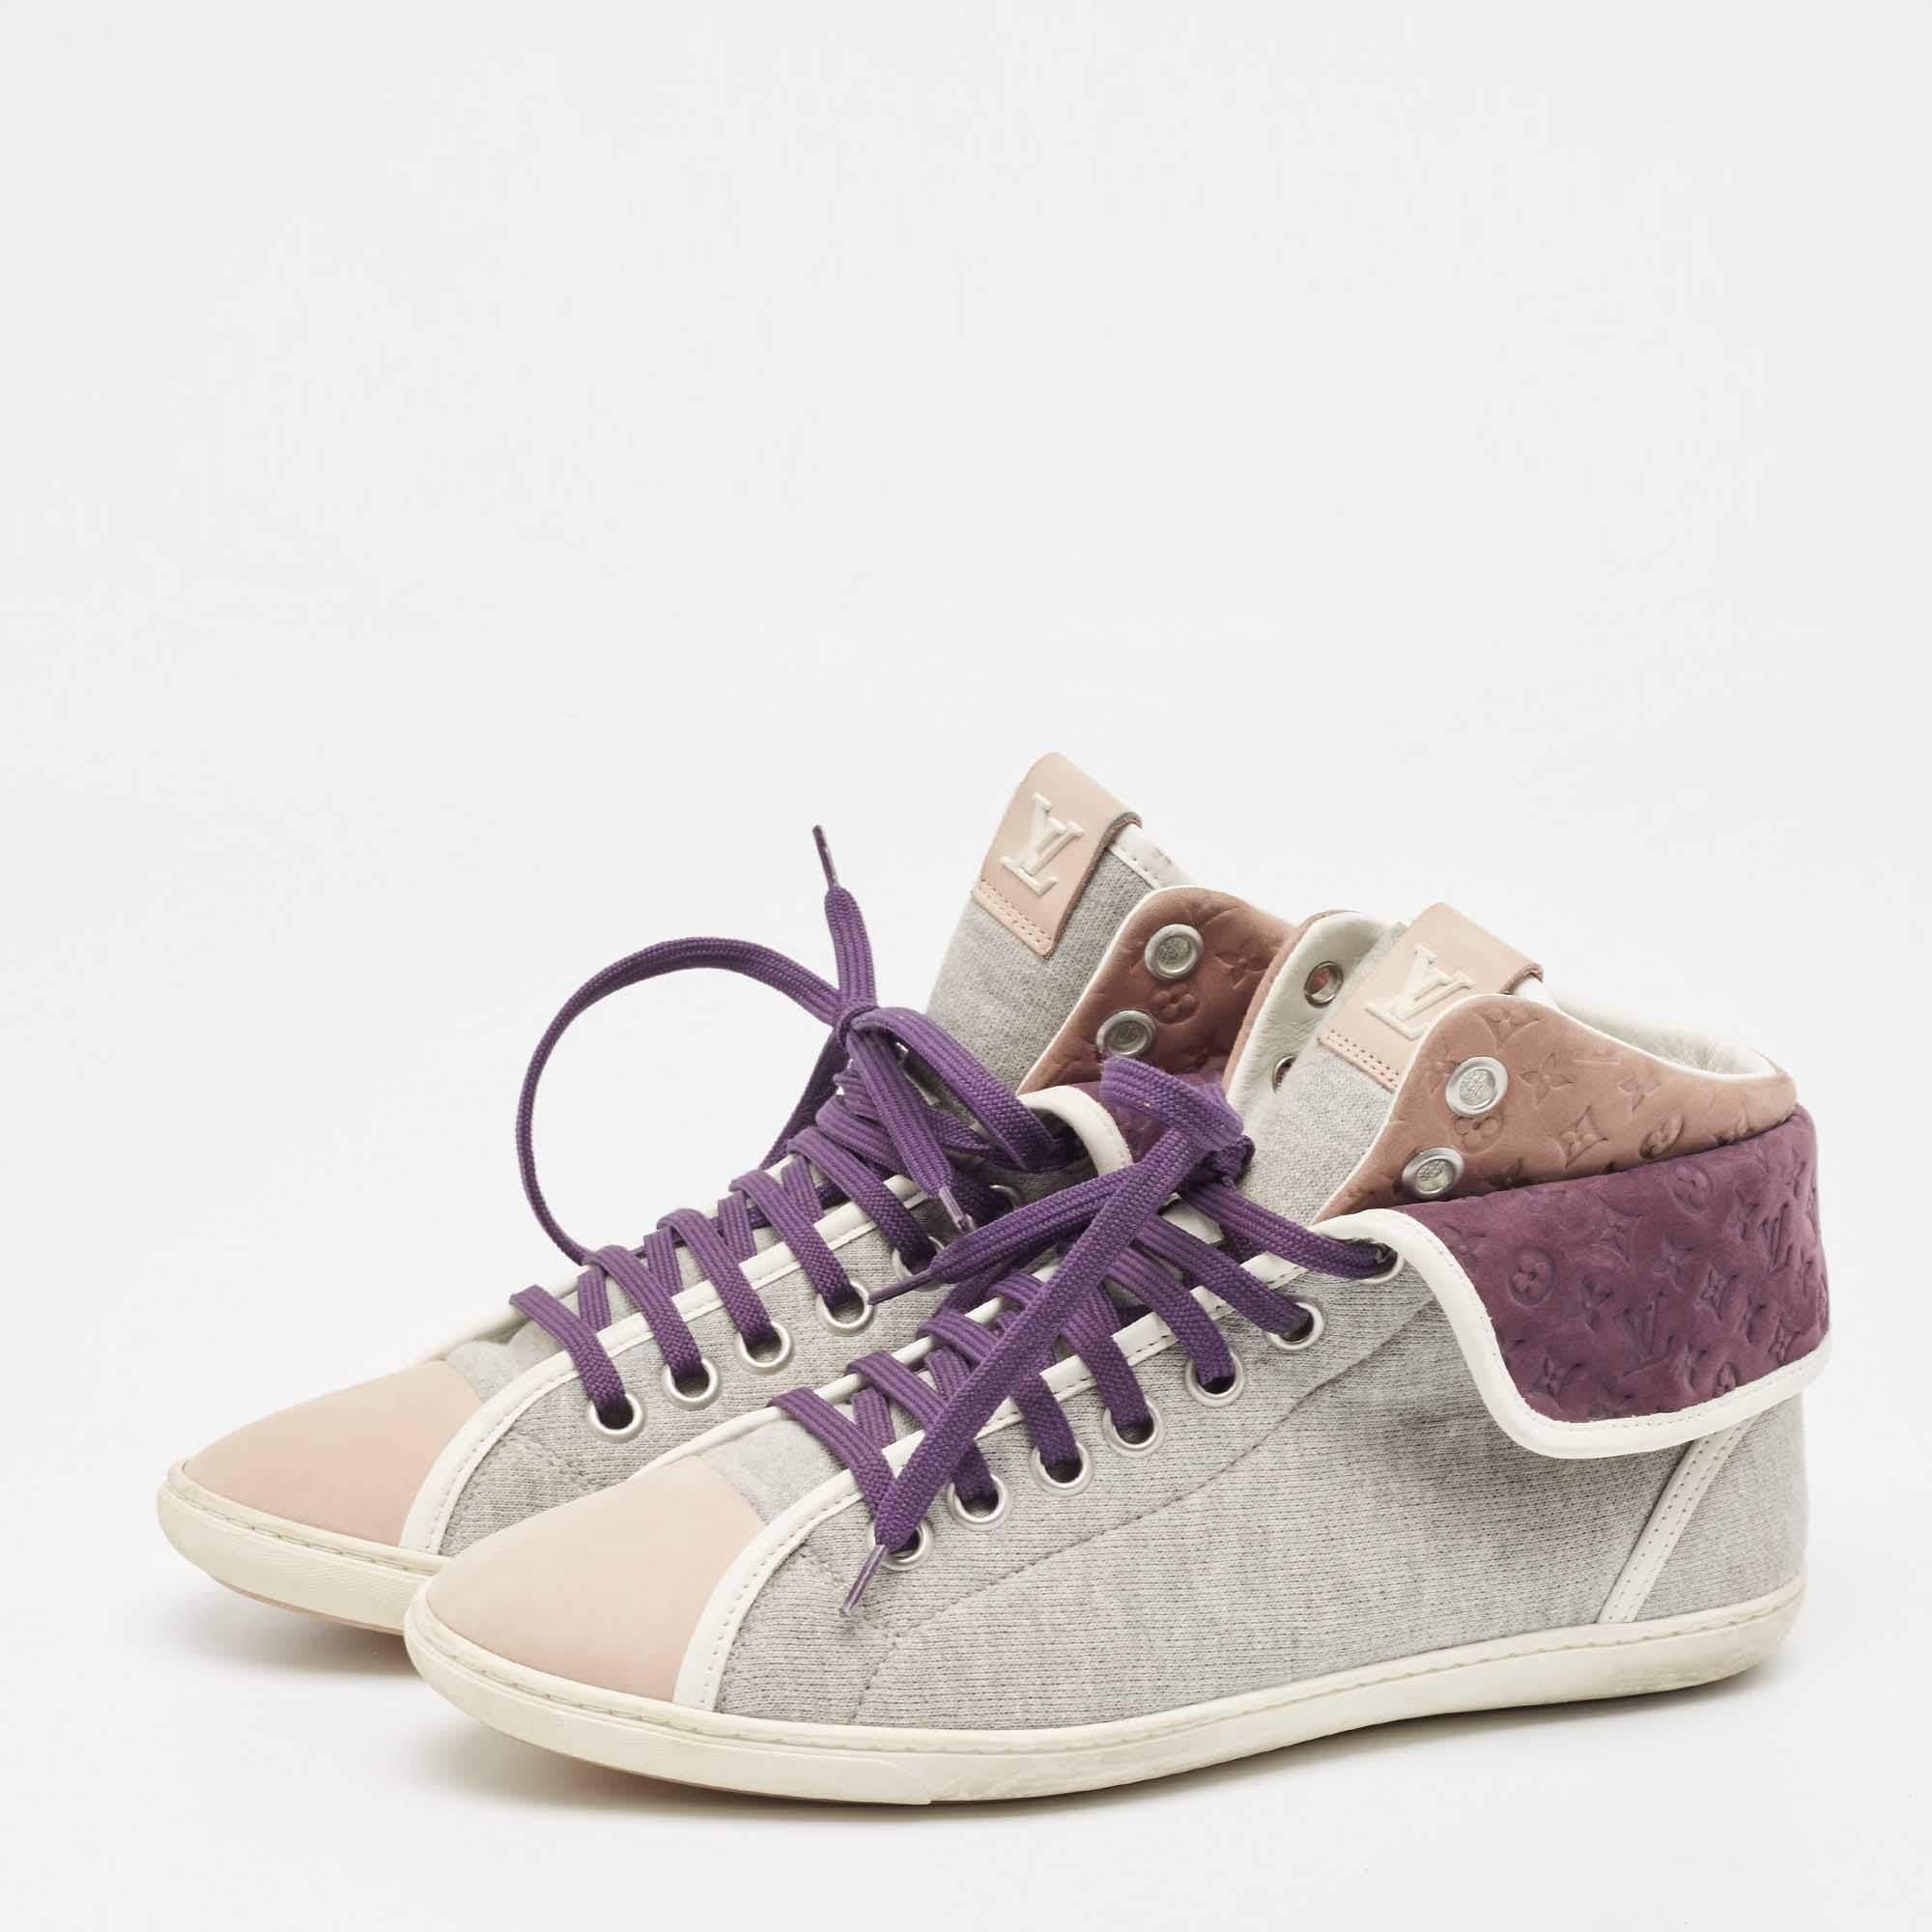 Louis Vuitton Multicolor Fabrice and Fabric Brea High Top Sneakers Size ...